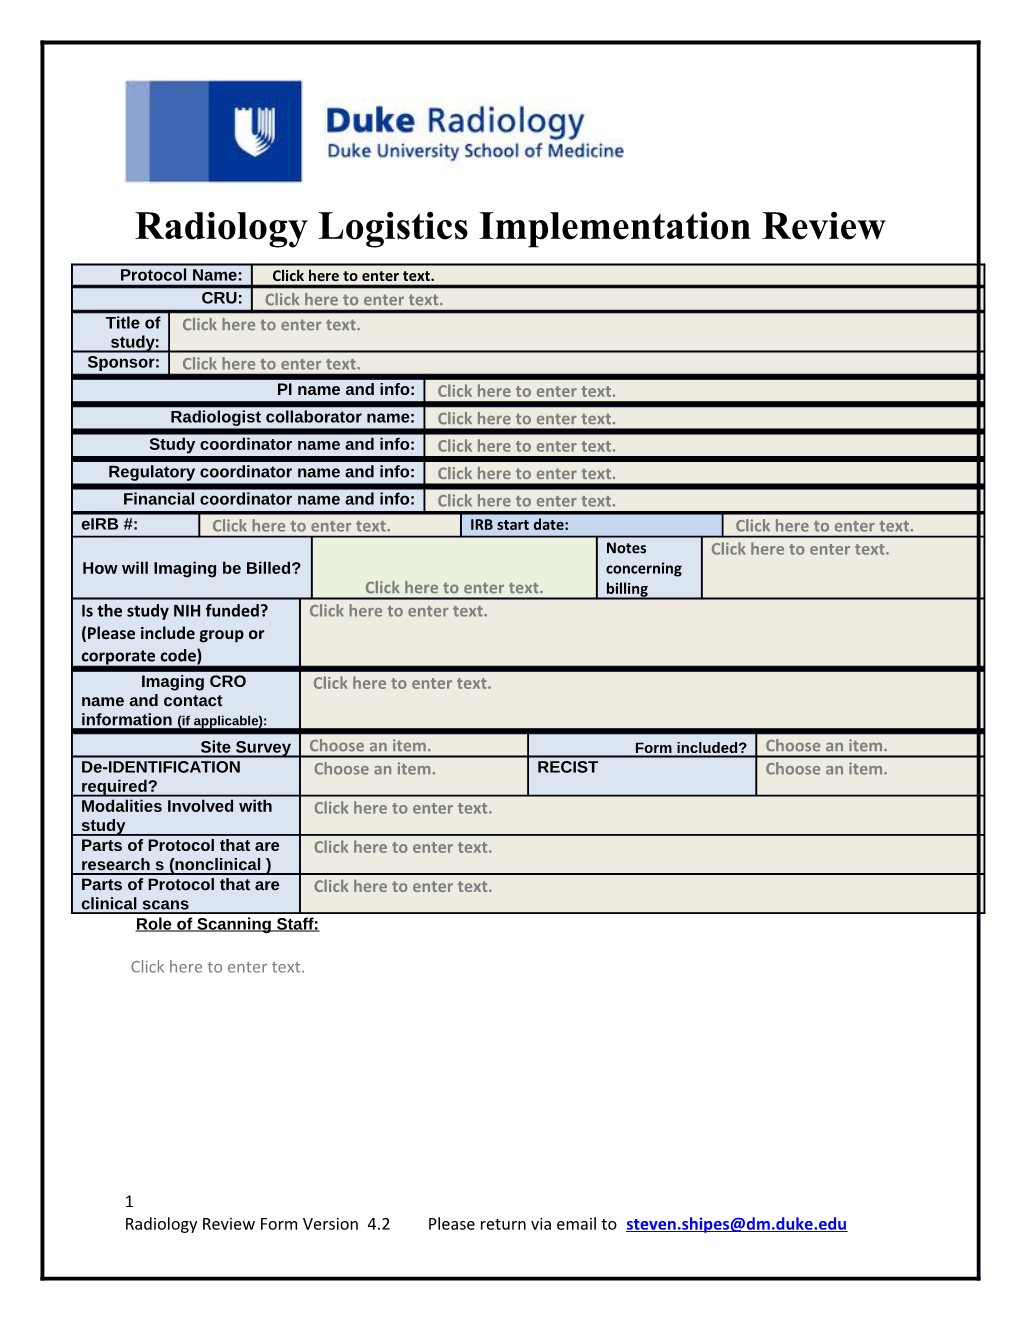 Radiology Logistics Implementation Review